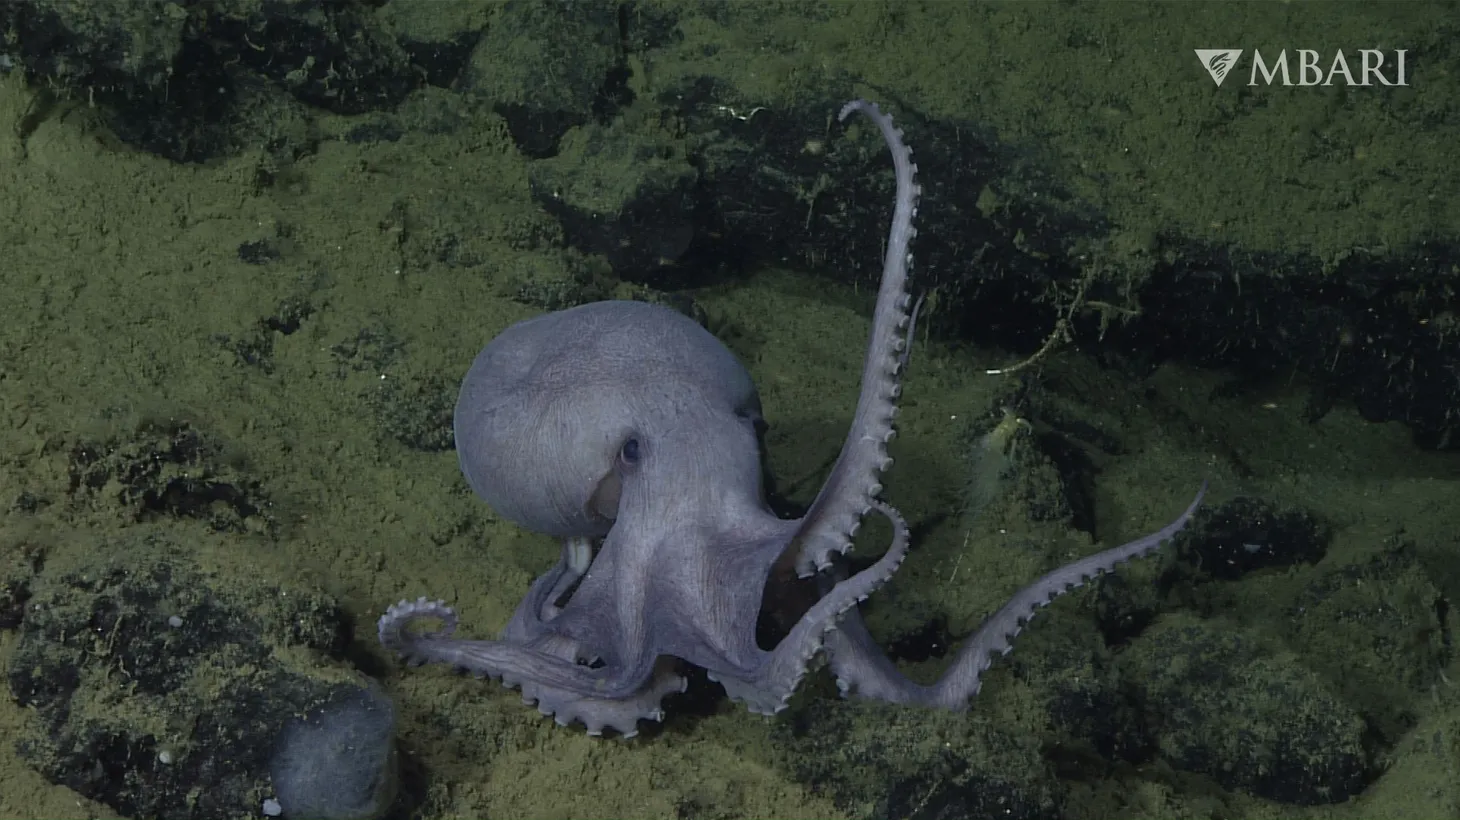 “If we touch them, they immediately respond. And they're thinking about things and taking care of their young. So I want to think they're pretty smart,” scientist James Barry says of pearl octopuses.